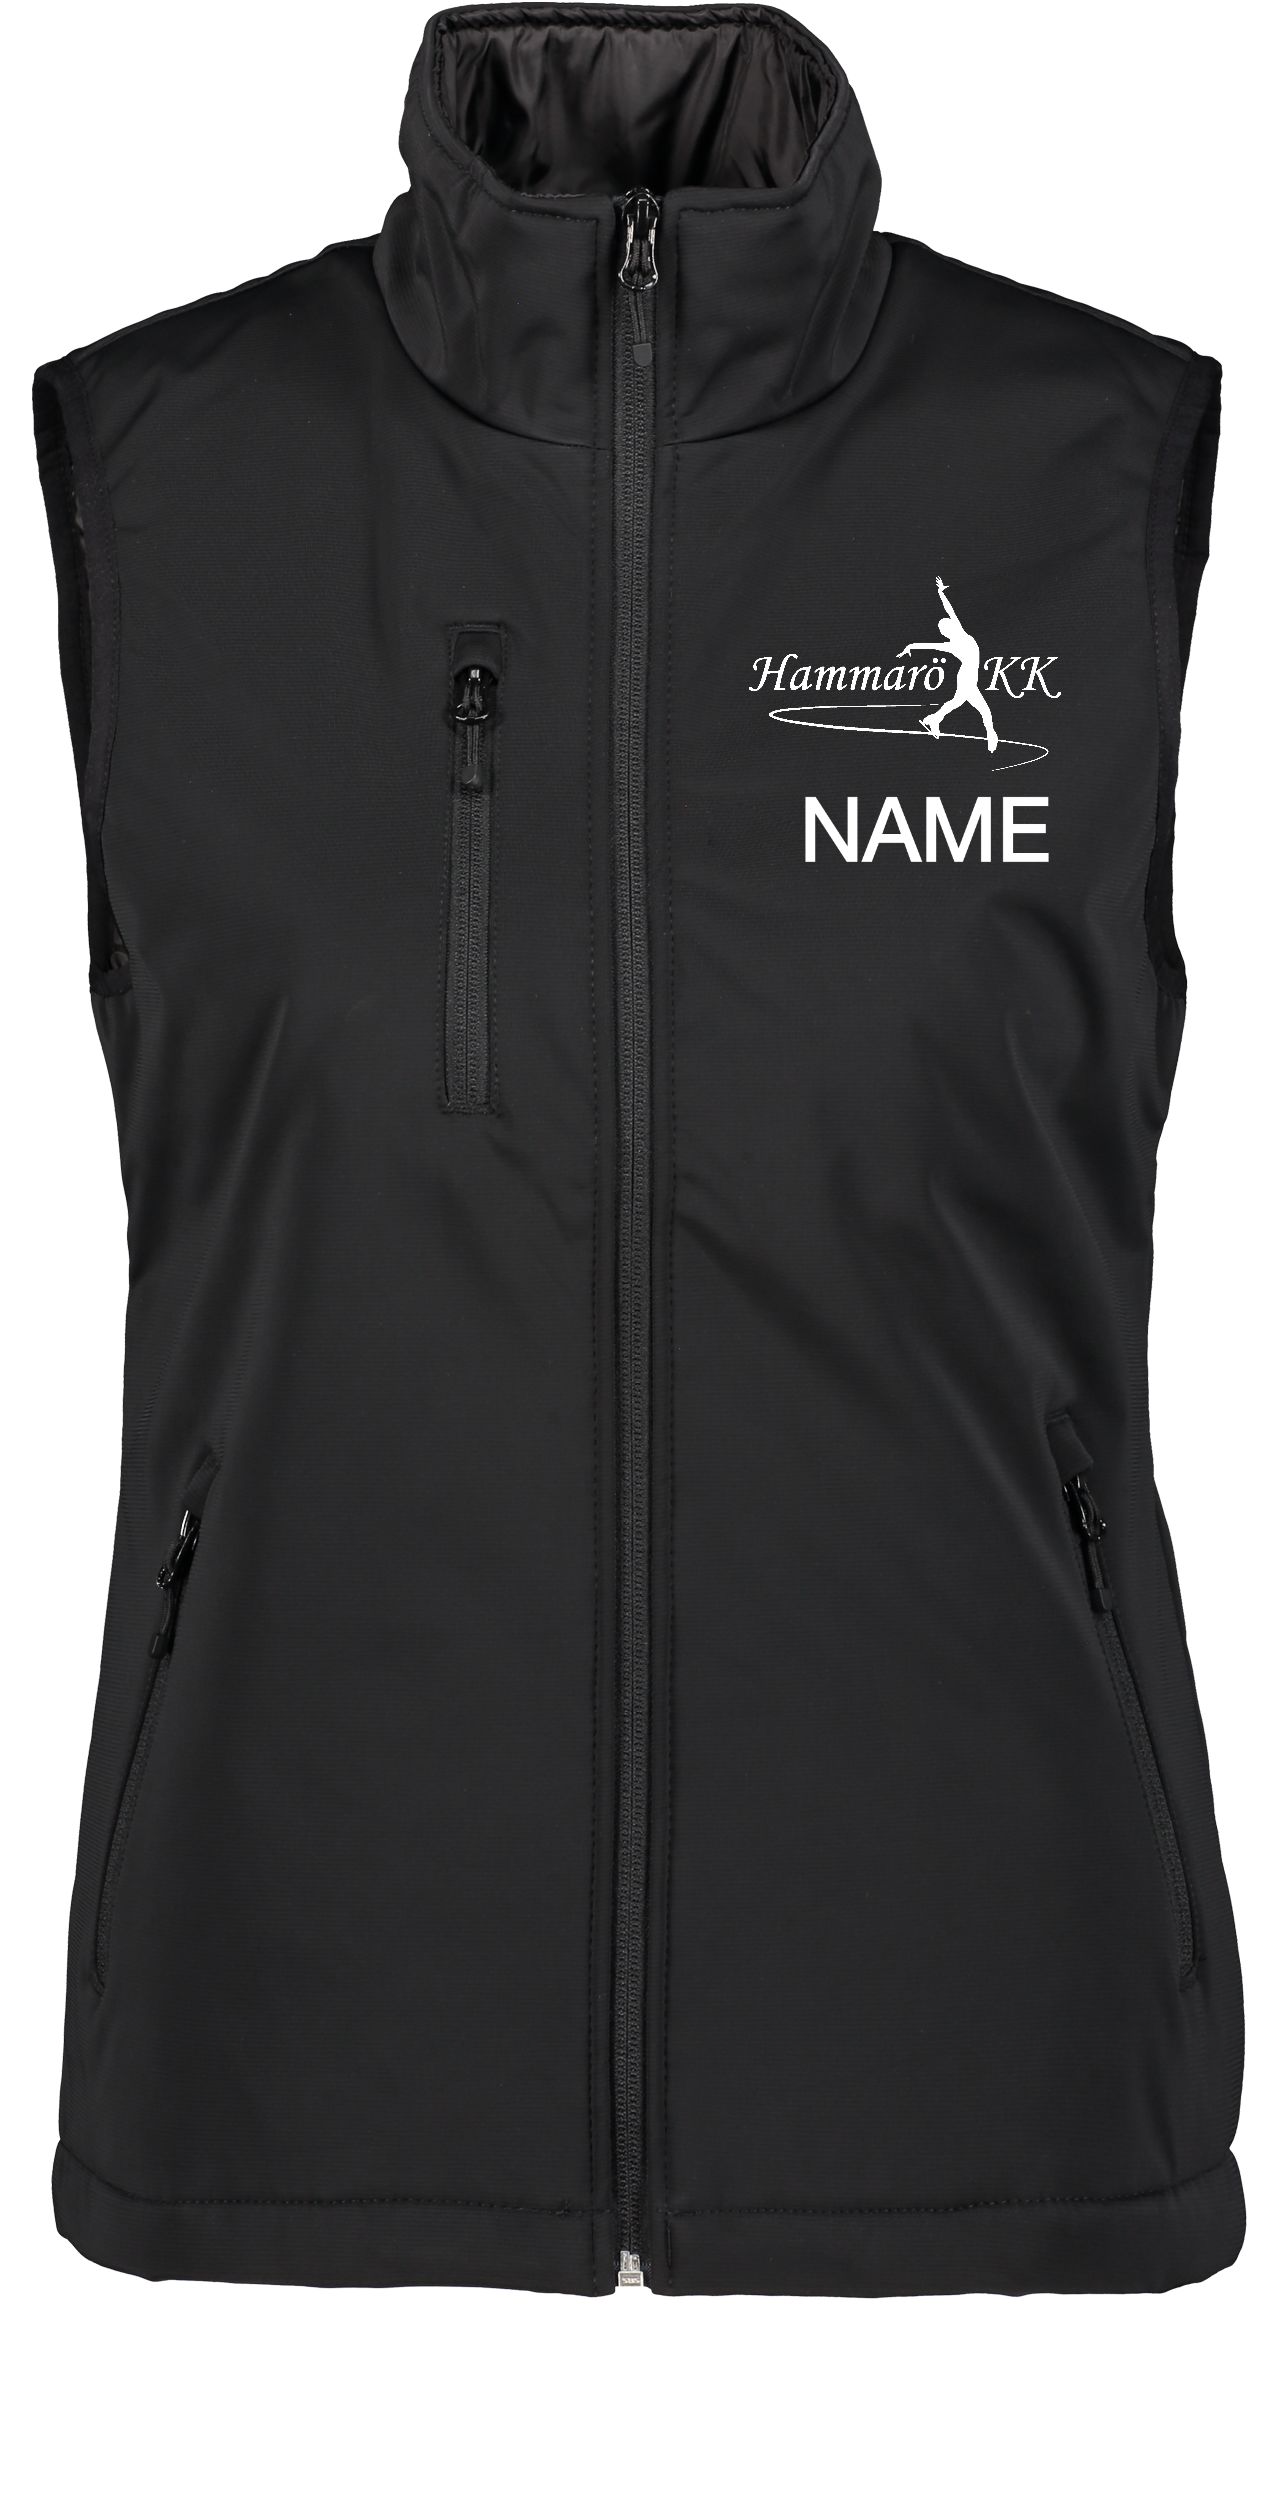 CLIQUE, PADDED SOFTSHELL VEST W